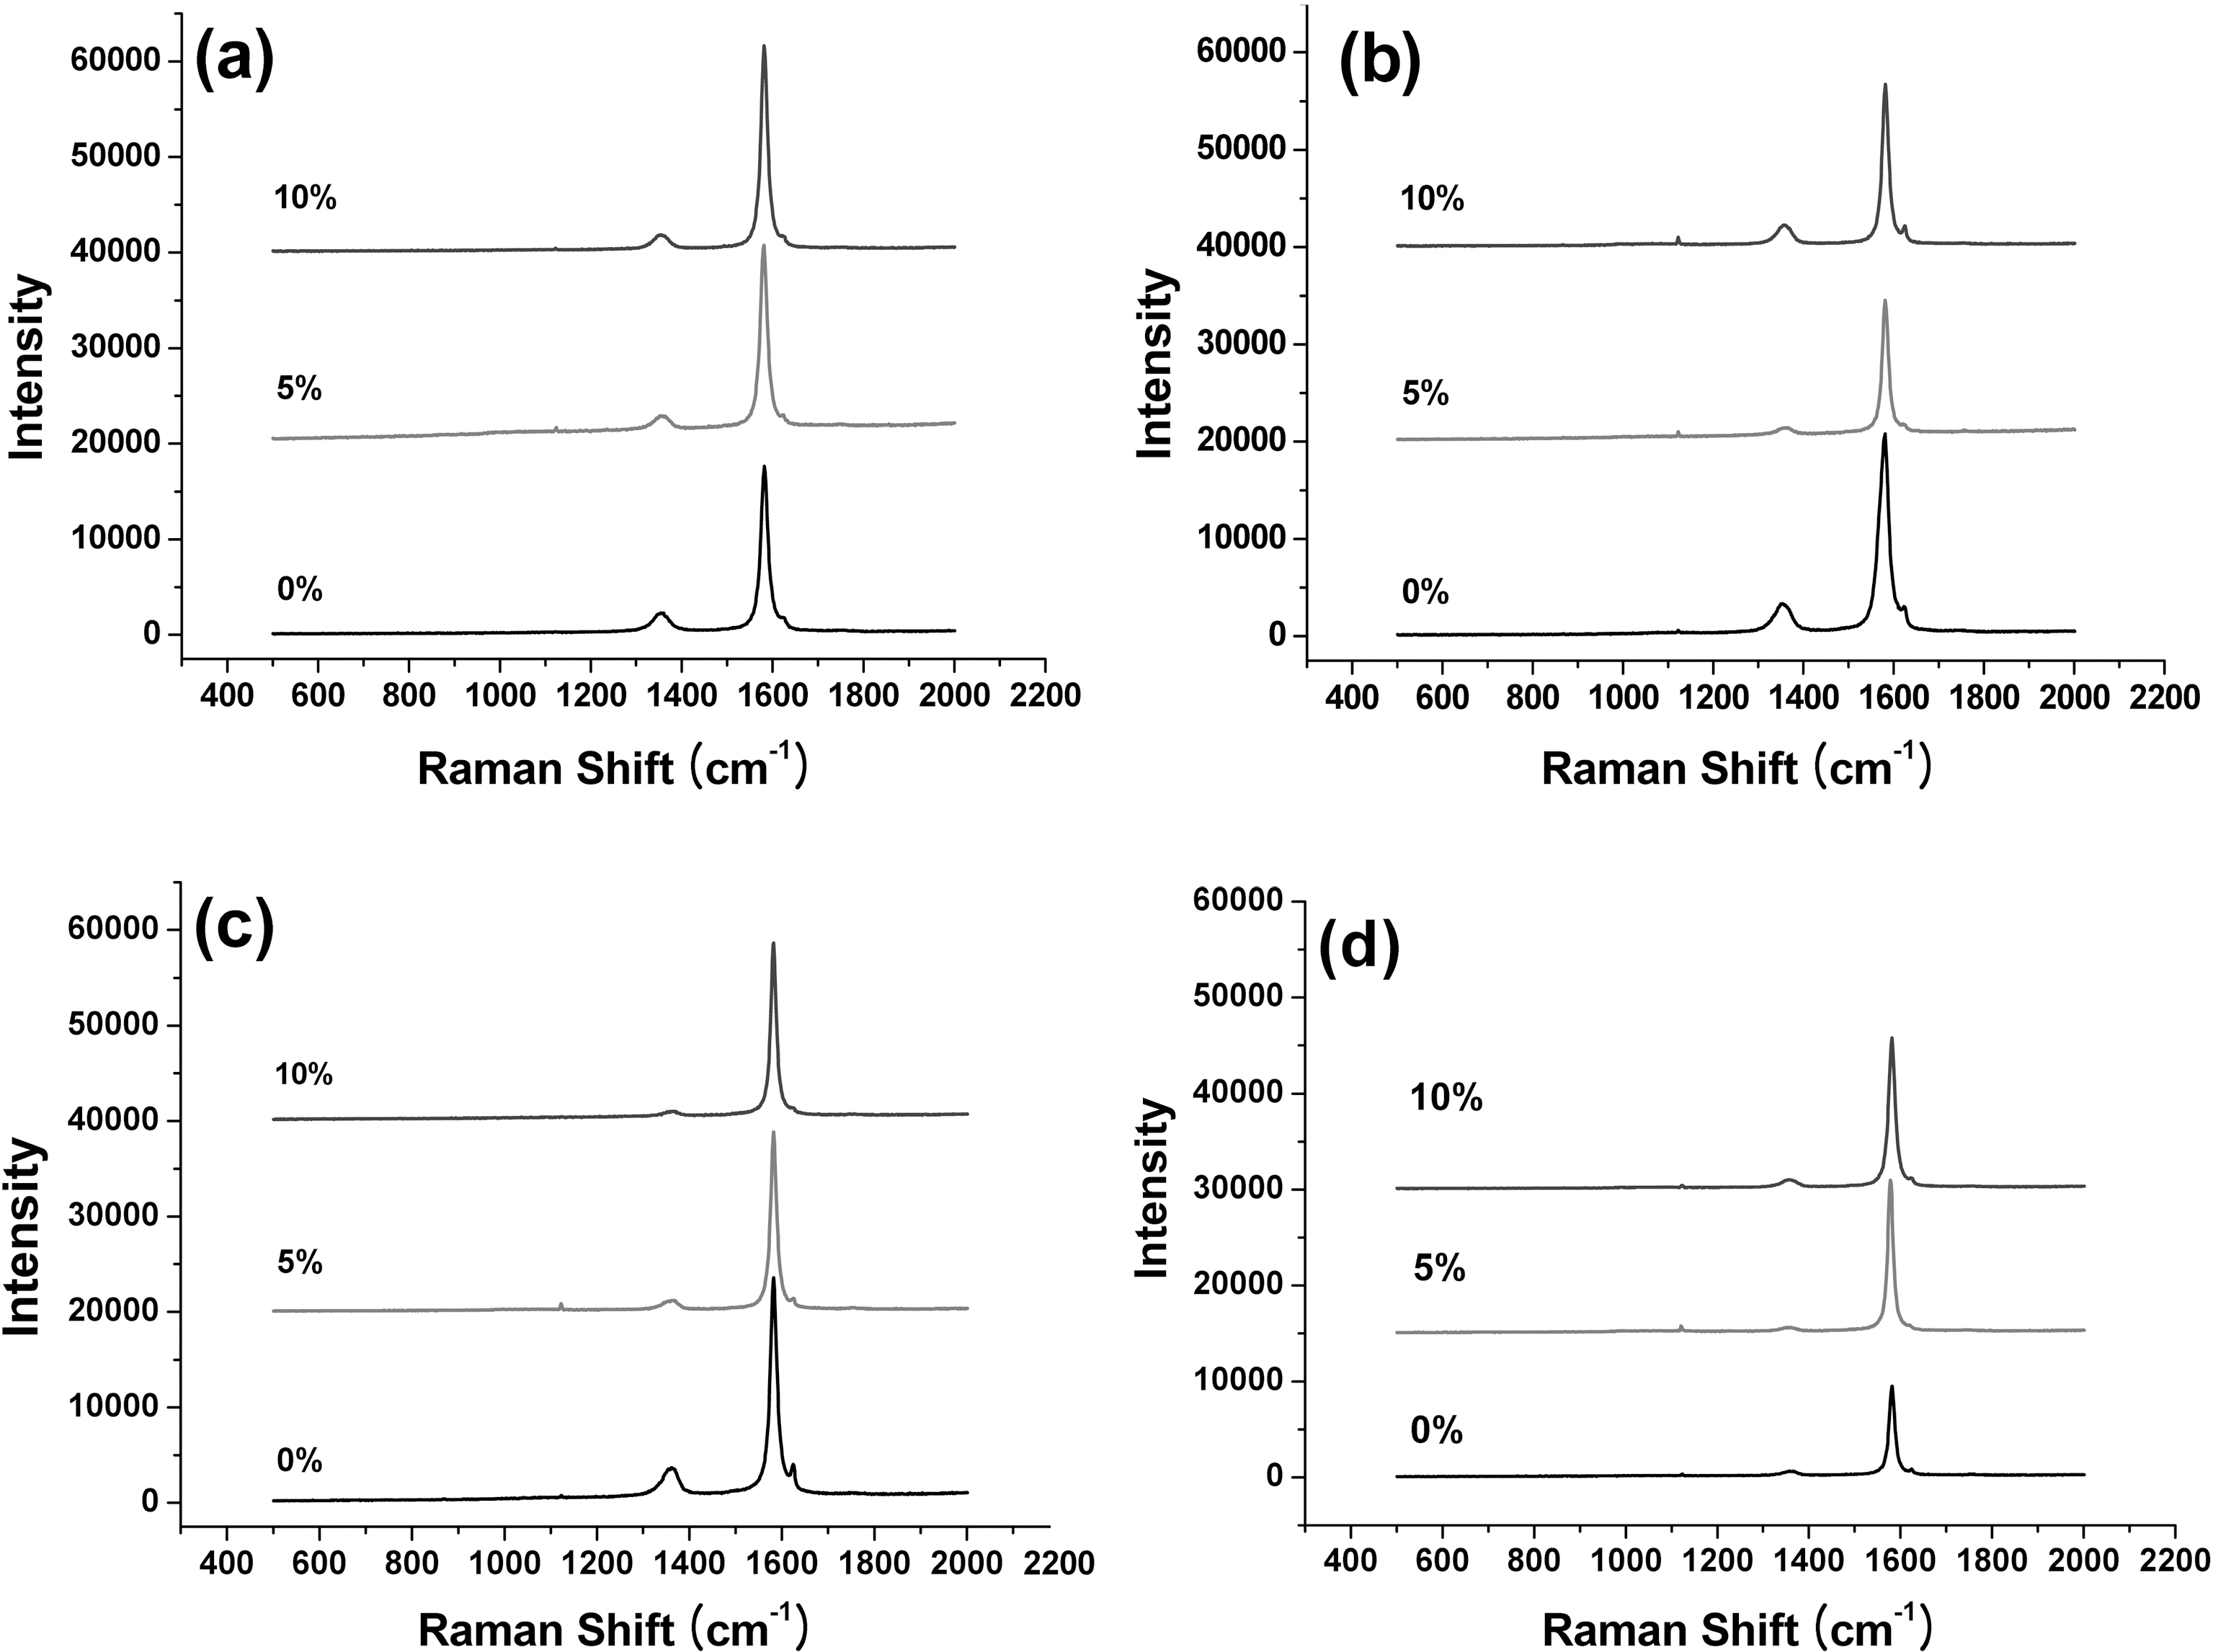 Raman spectra as a function of oxidation of nuclear graphite; (a) IG-110 (b) PCEA (c) IG-430 (d) NBG-18.